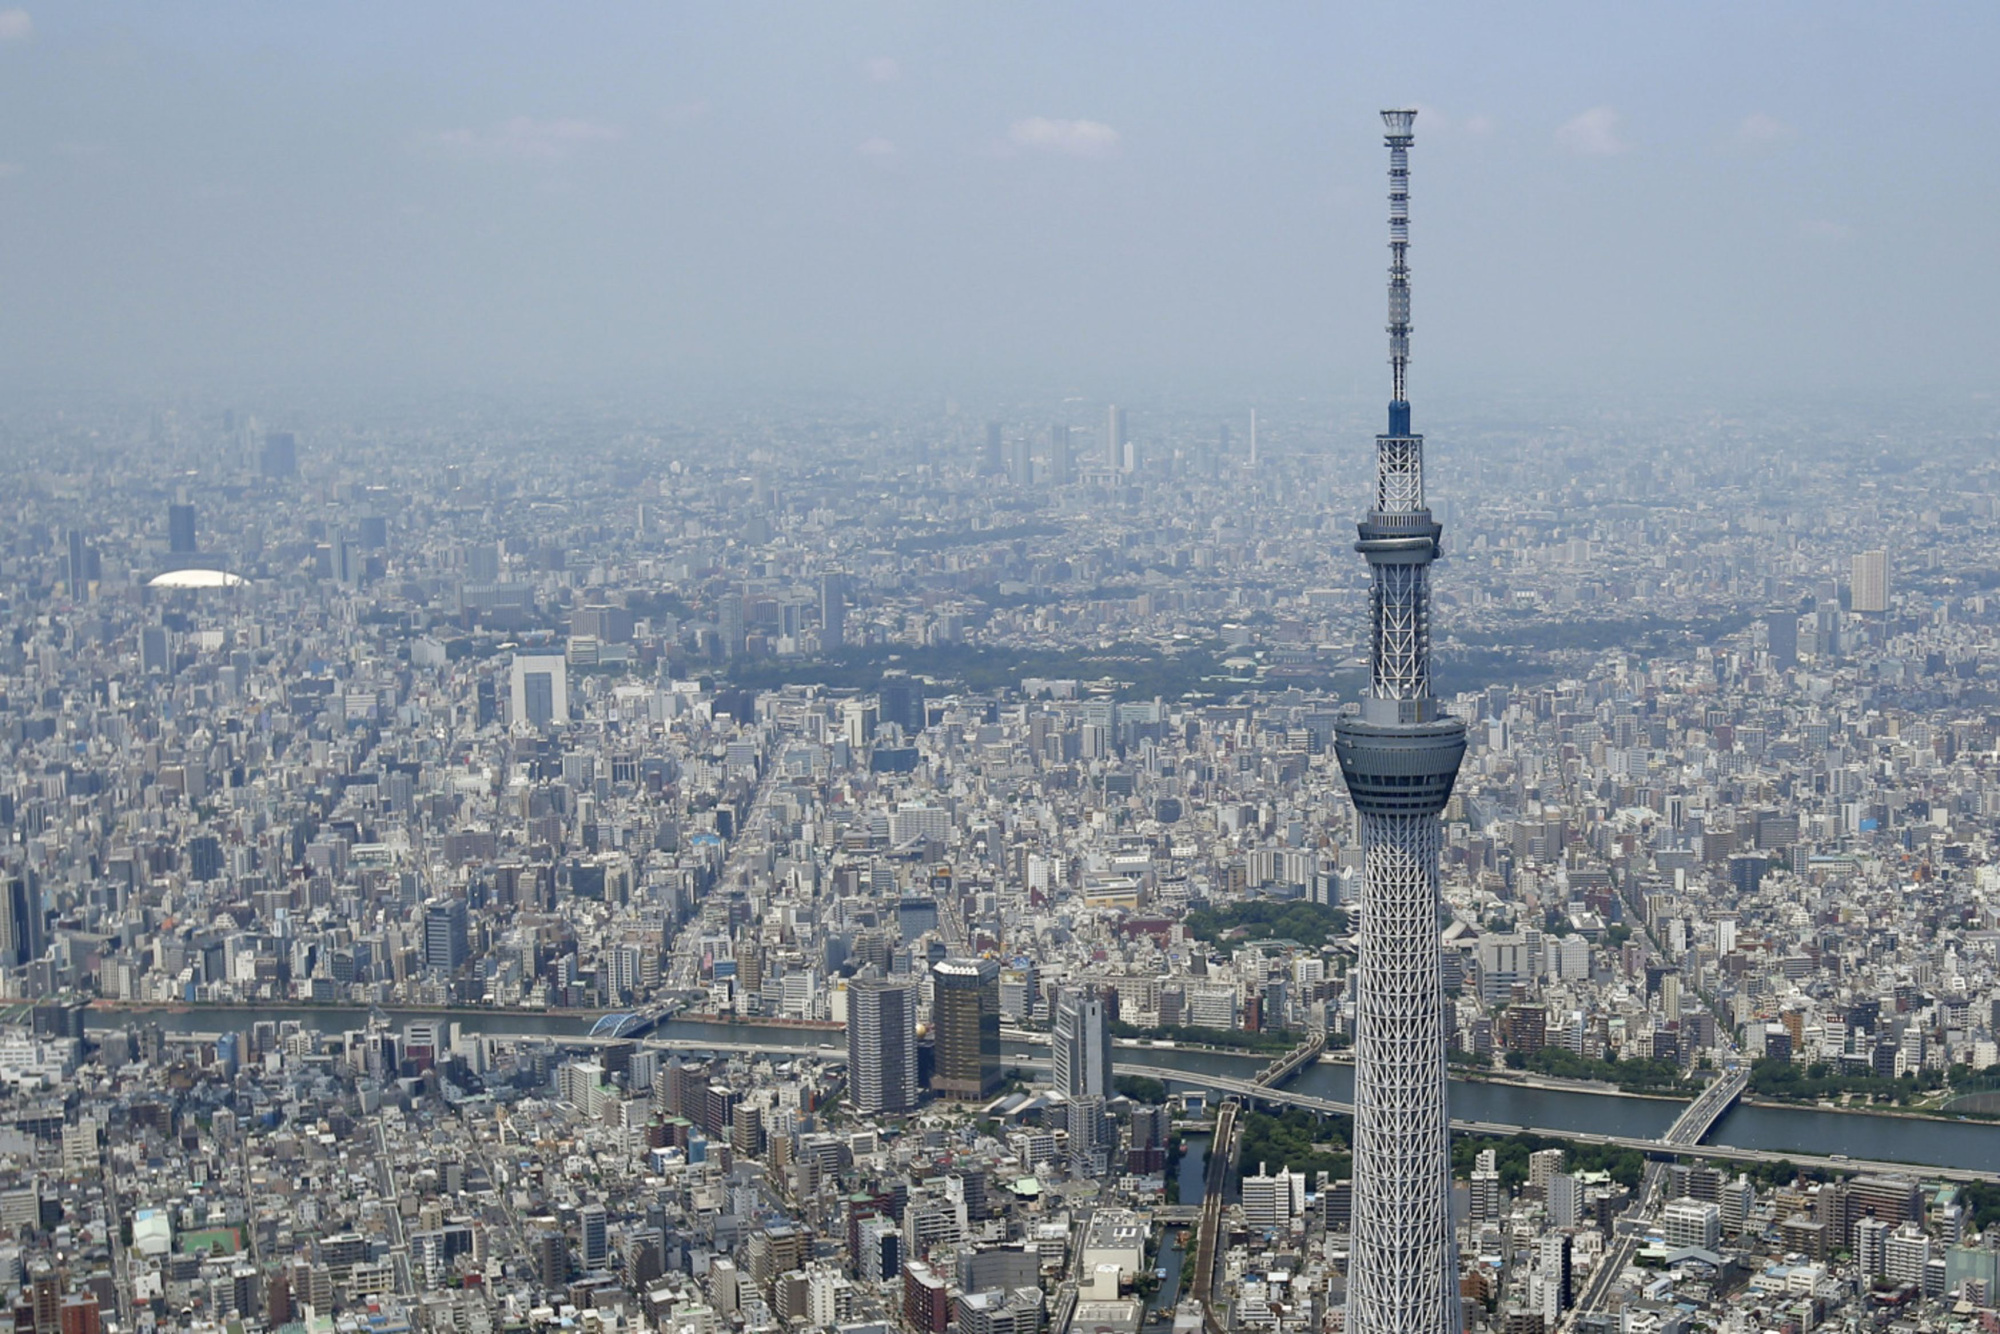 Tokyo aims to make the transition to renewable energy and achieve net-zero carbon emissions by 2050 under the Zero Emission Tokyo Strategy. | BLOOMBERG